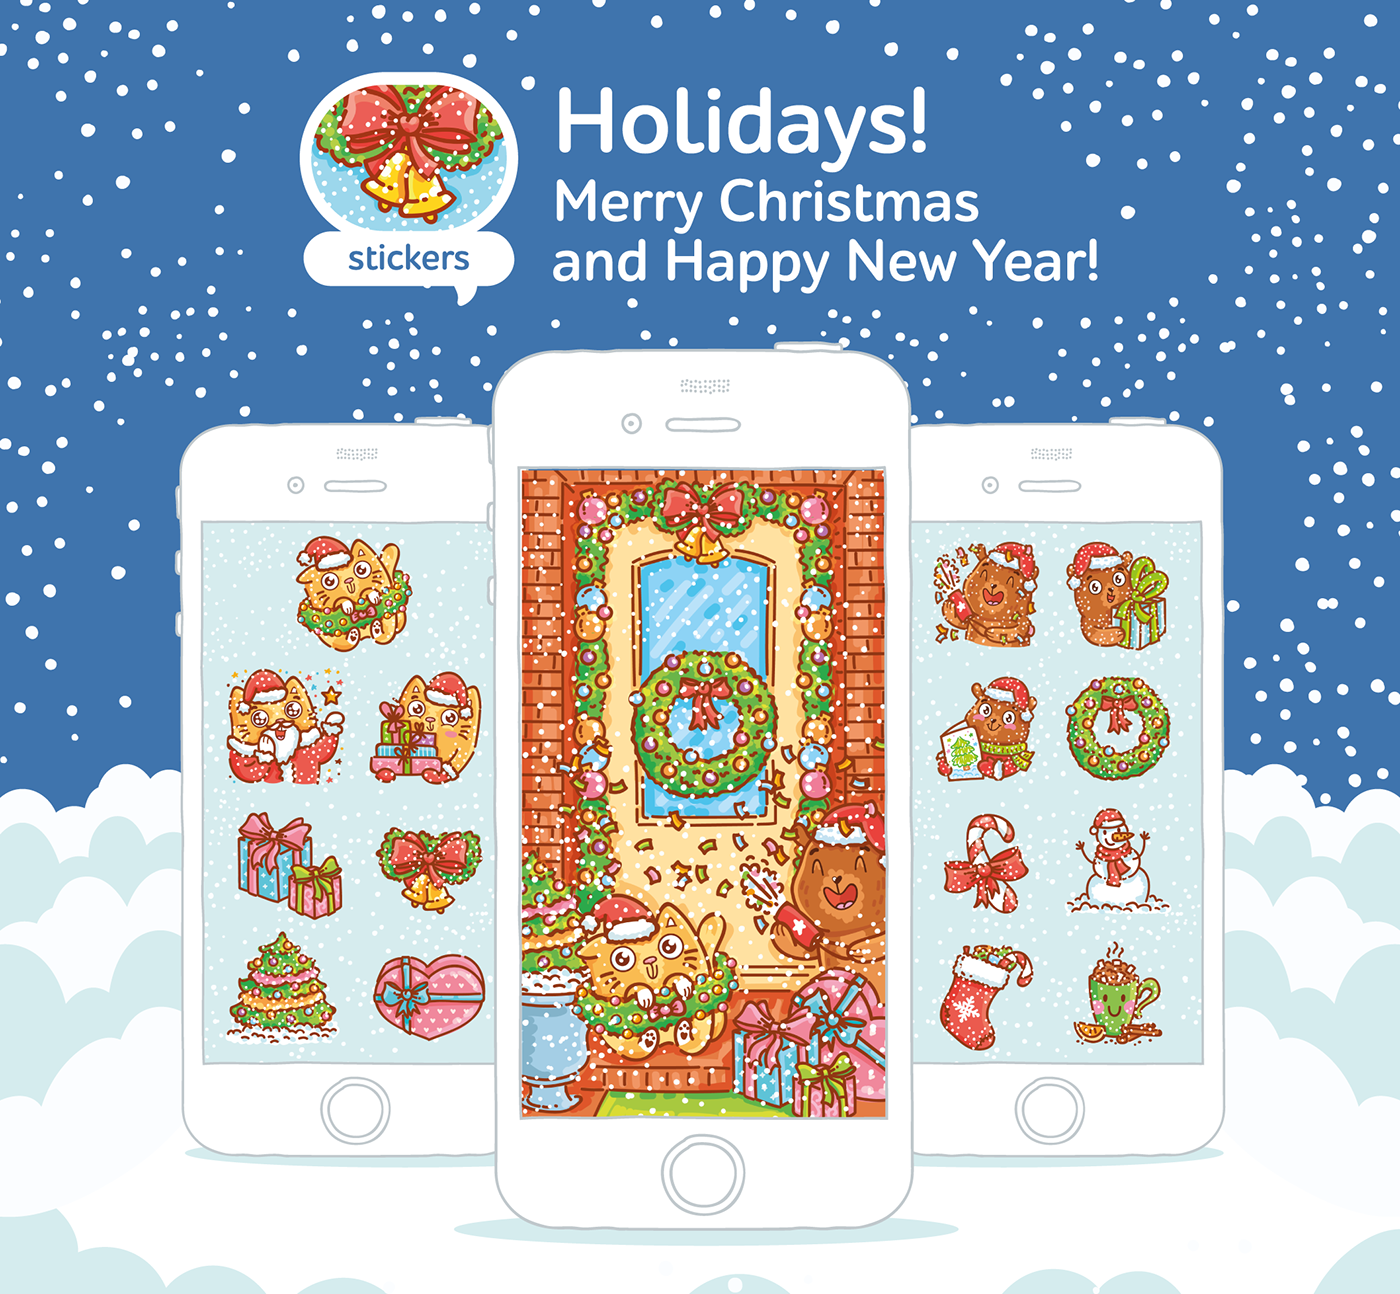 stickers holidays new year Christmas Merry Christmas imessage Cat bear cute snow